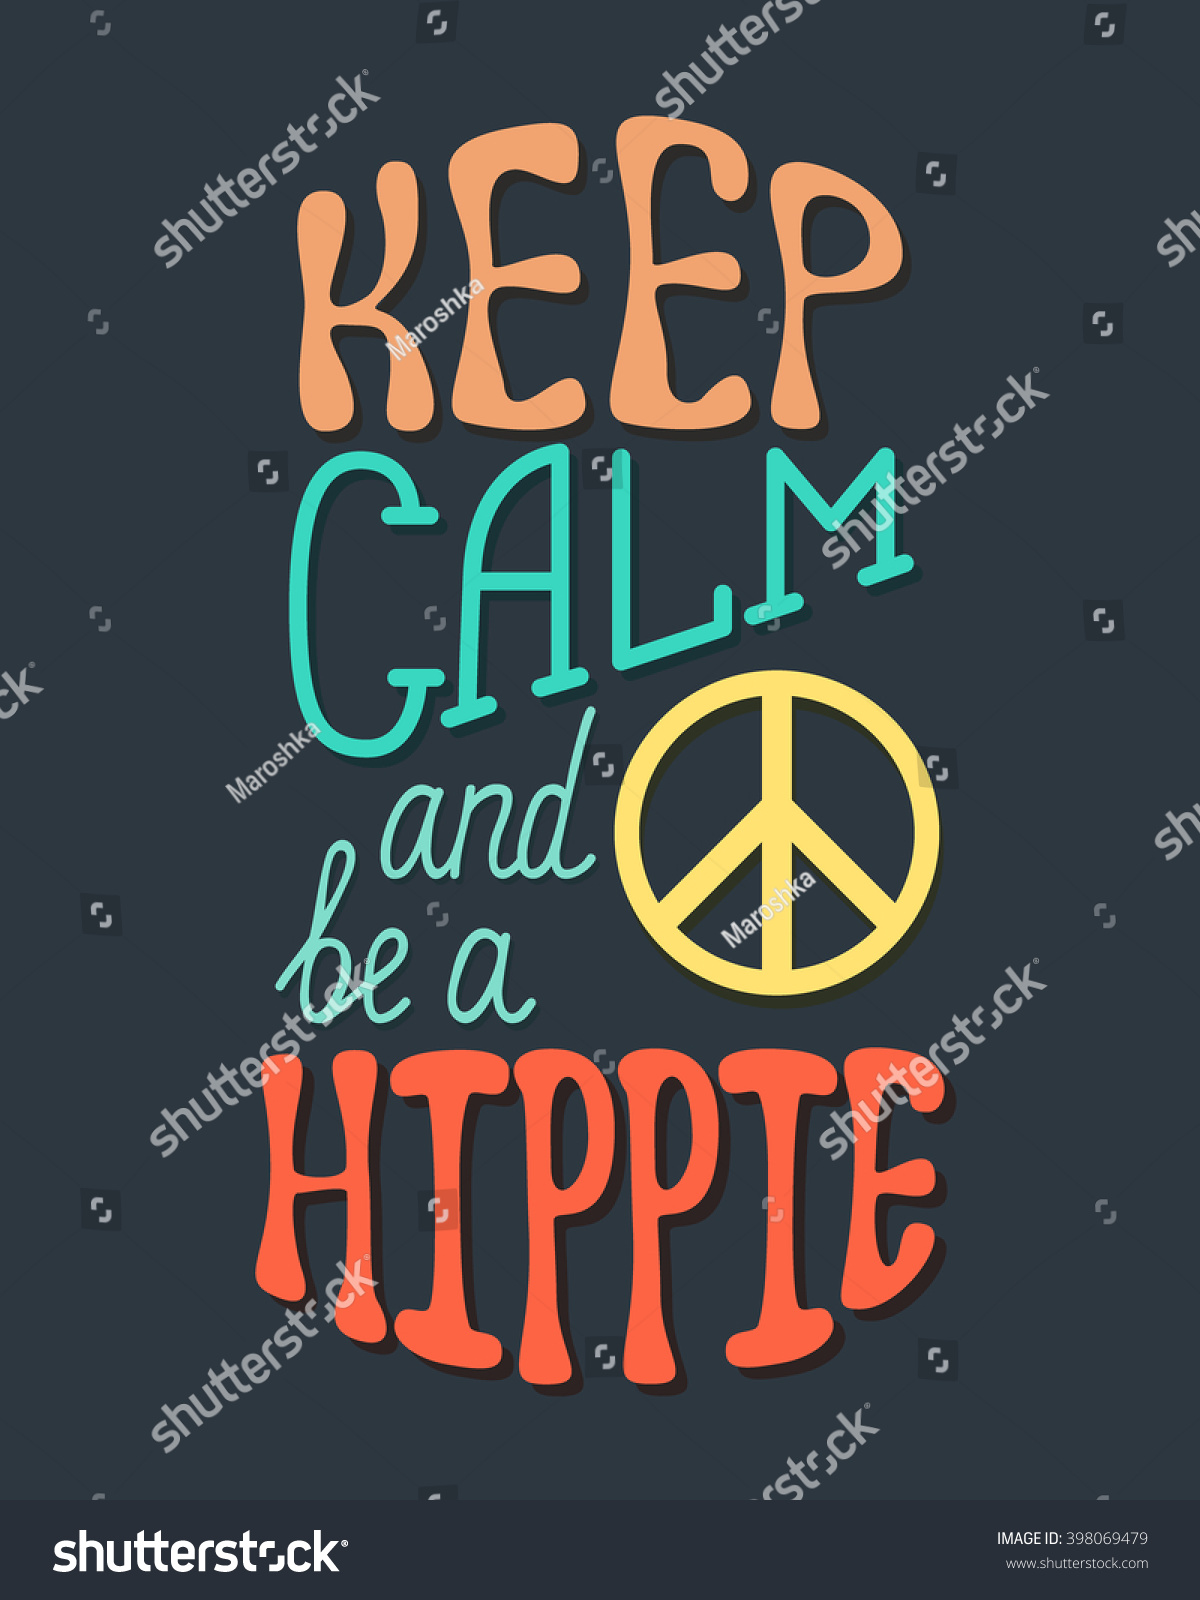 Keep Calm And Be A Hippie. Inspirational Quote About Hippy. Modern ...